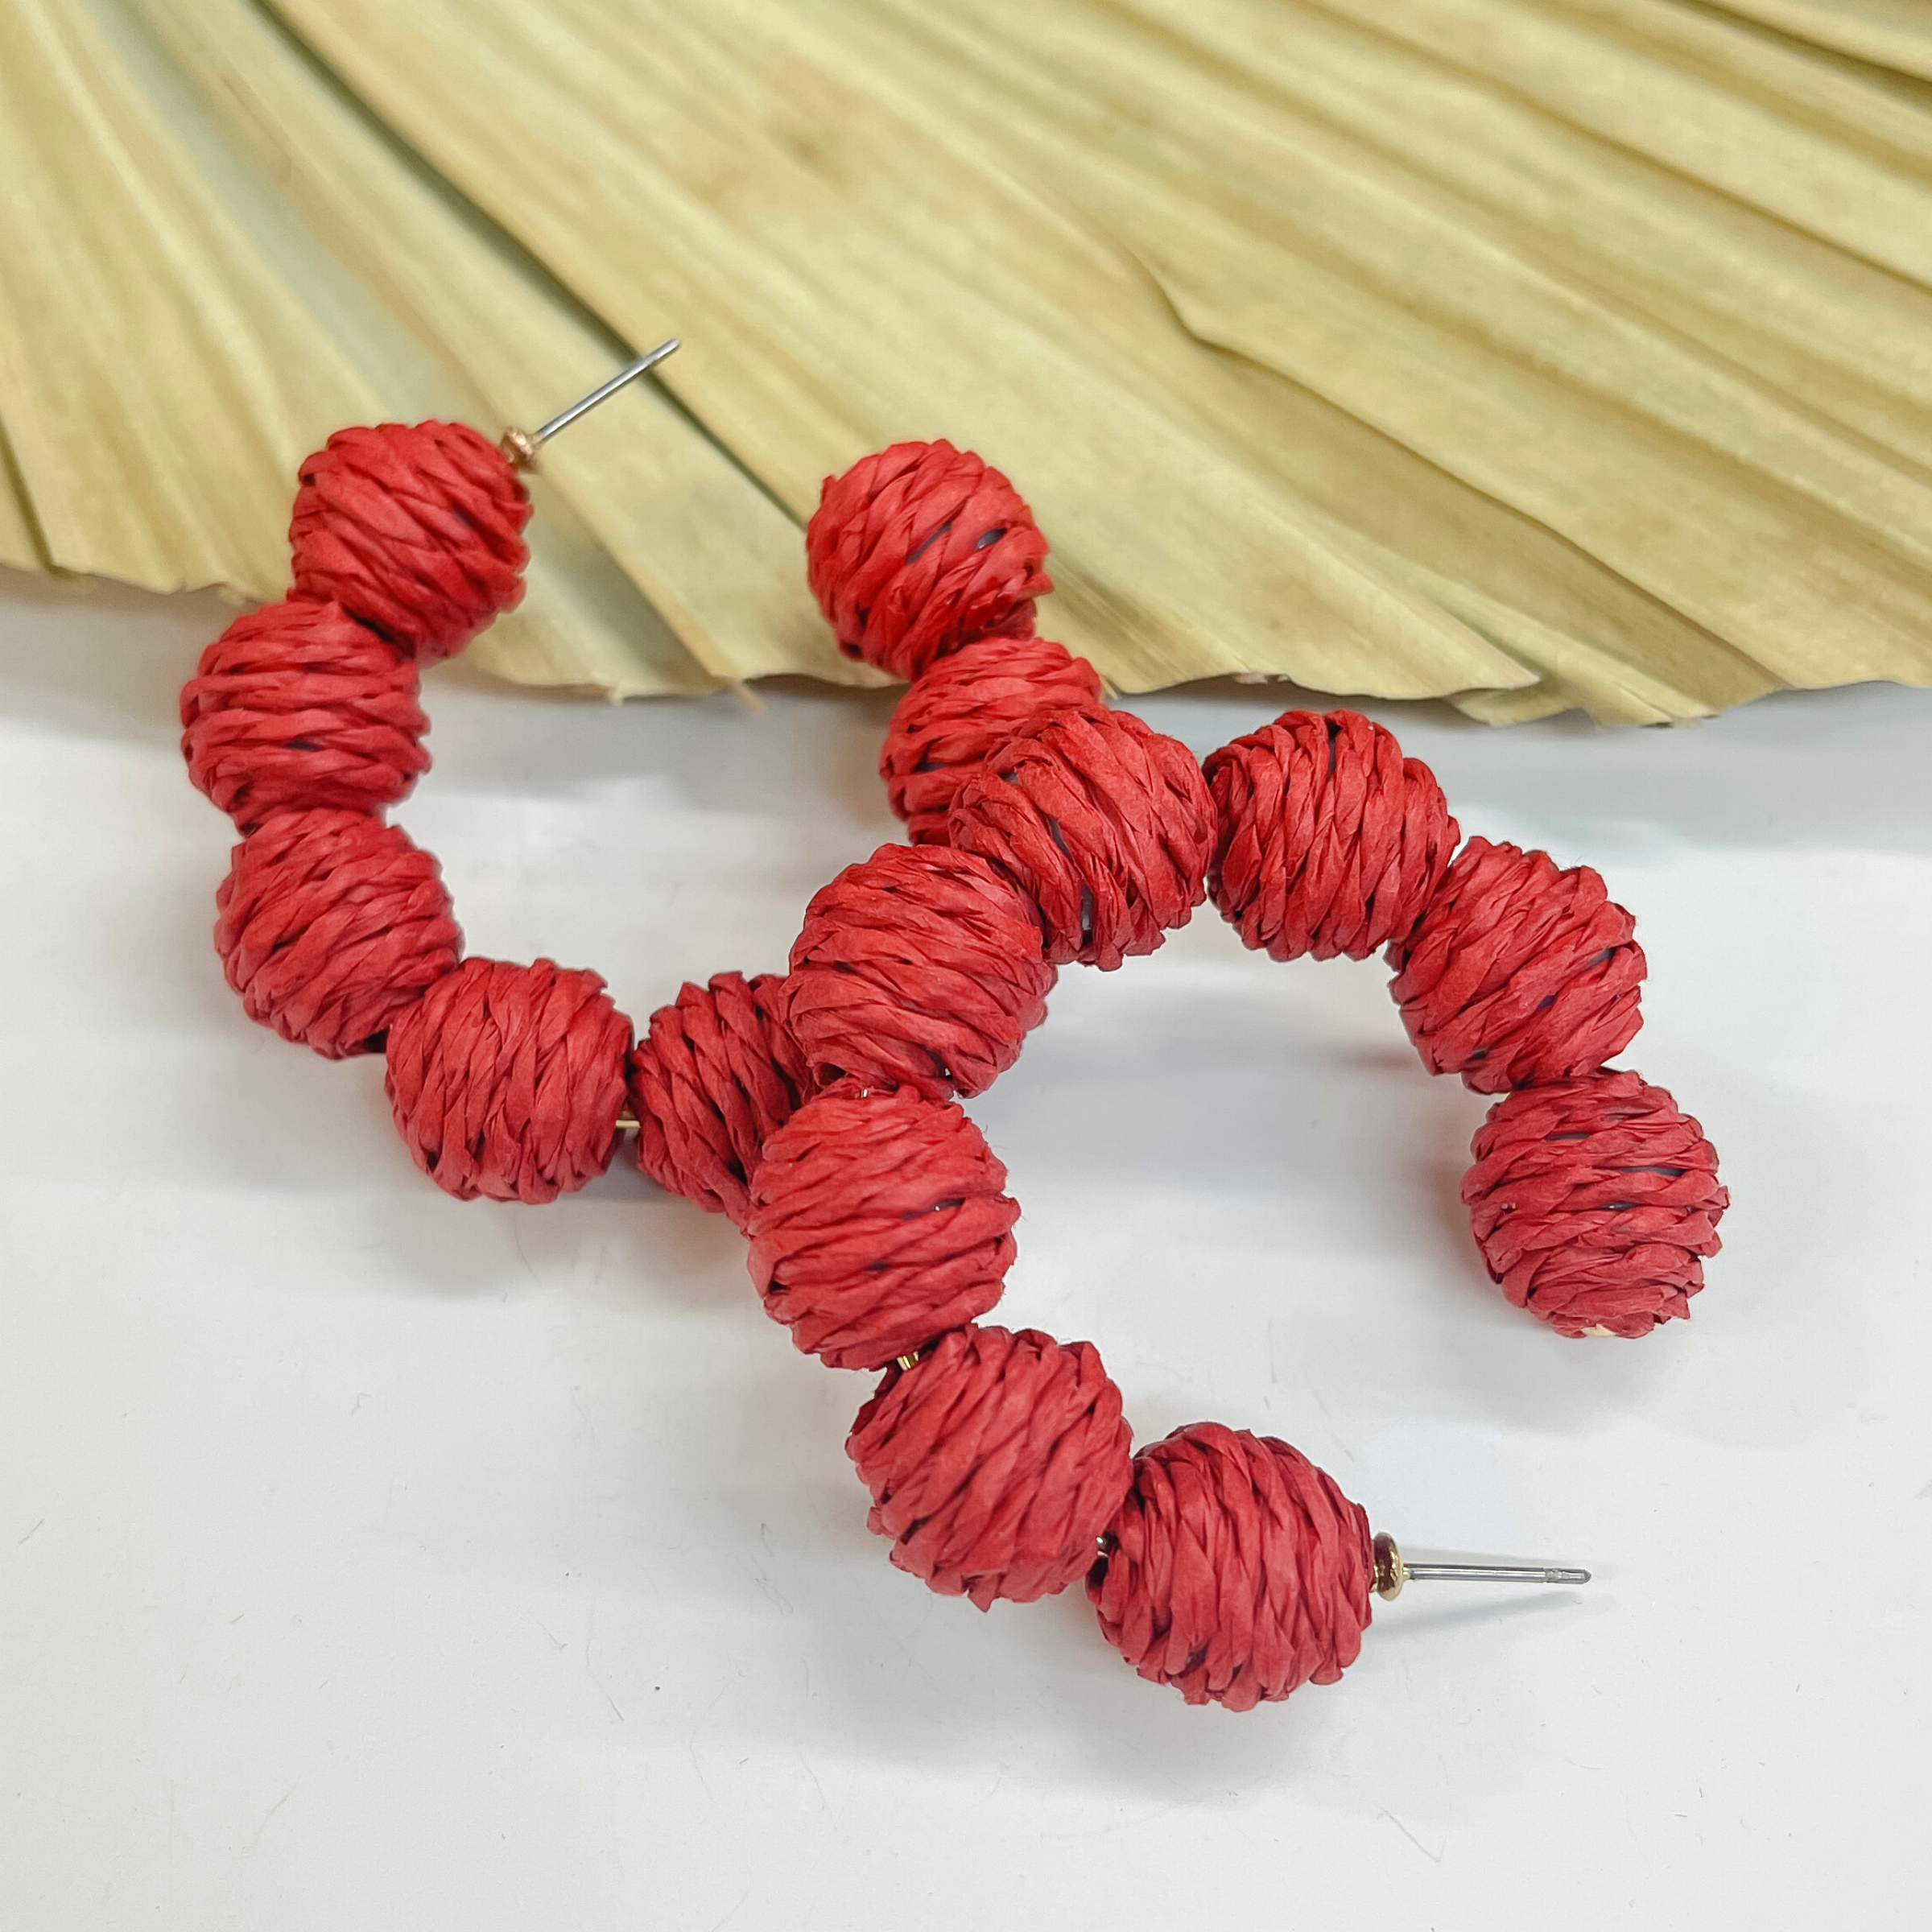 Hoop earrings with raffia balls around. The balls are wrapped in red raffia. Taken on a white background and  leaned up against a dried up palm leaf.